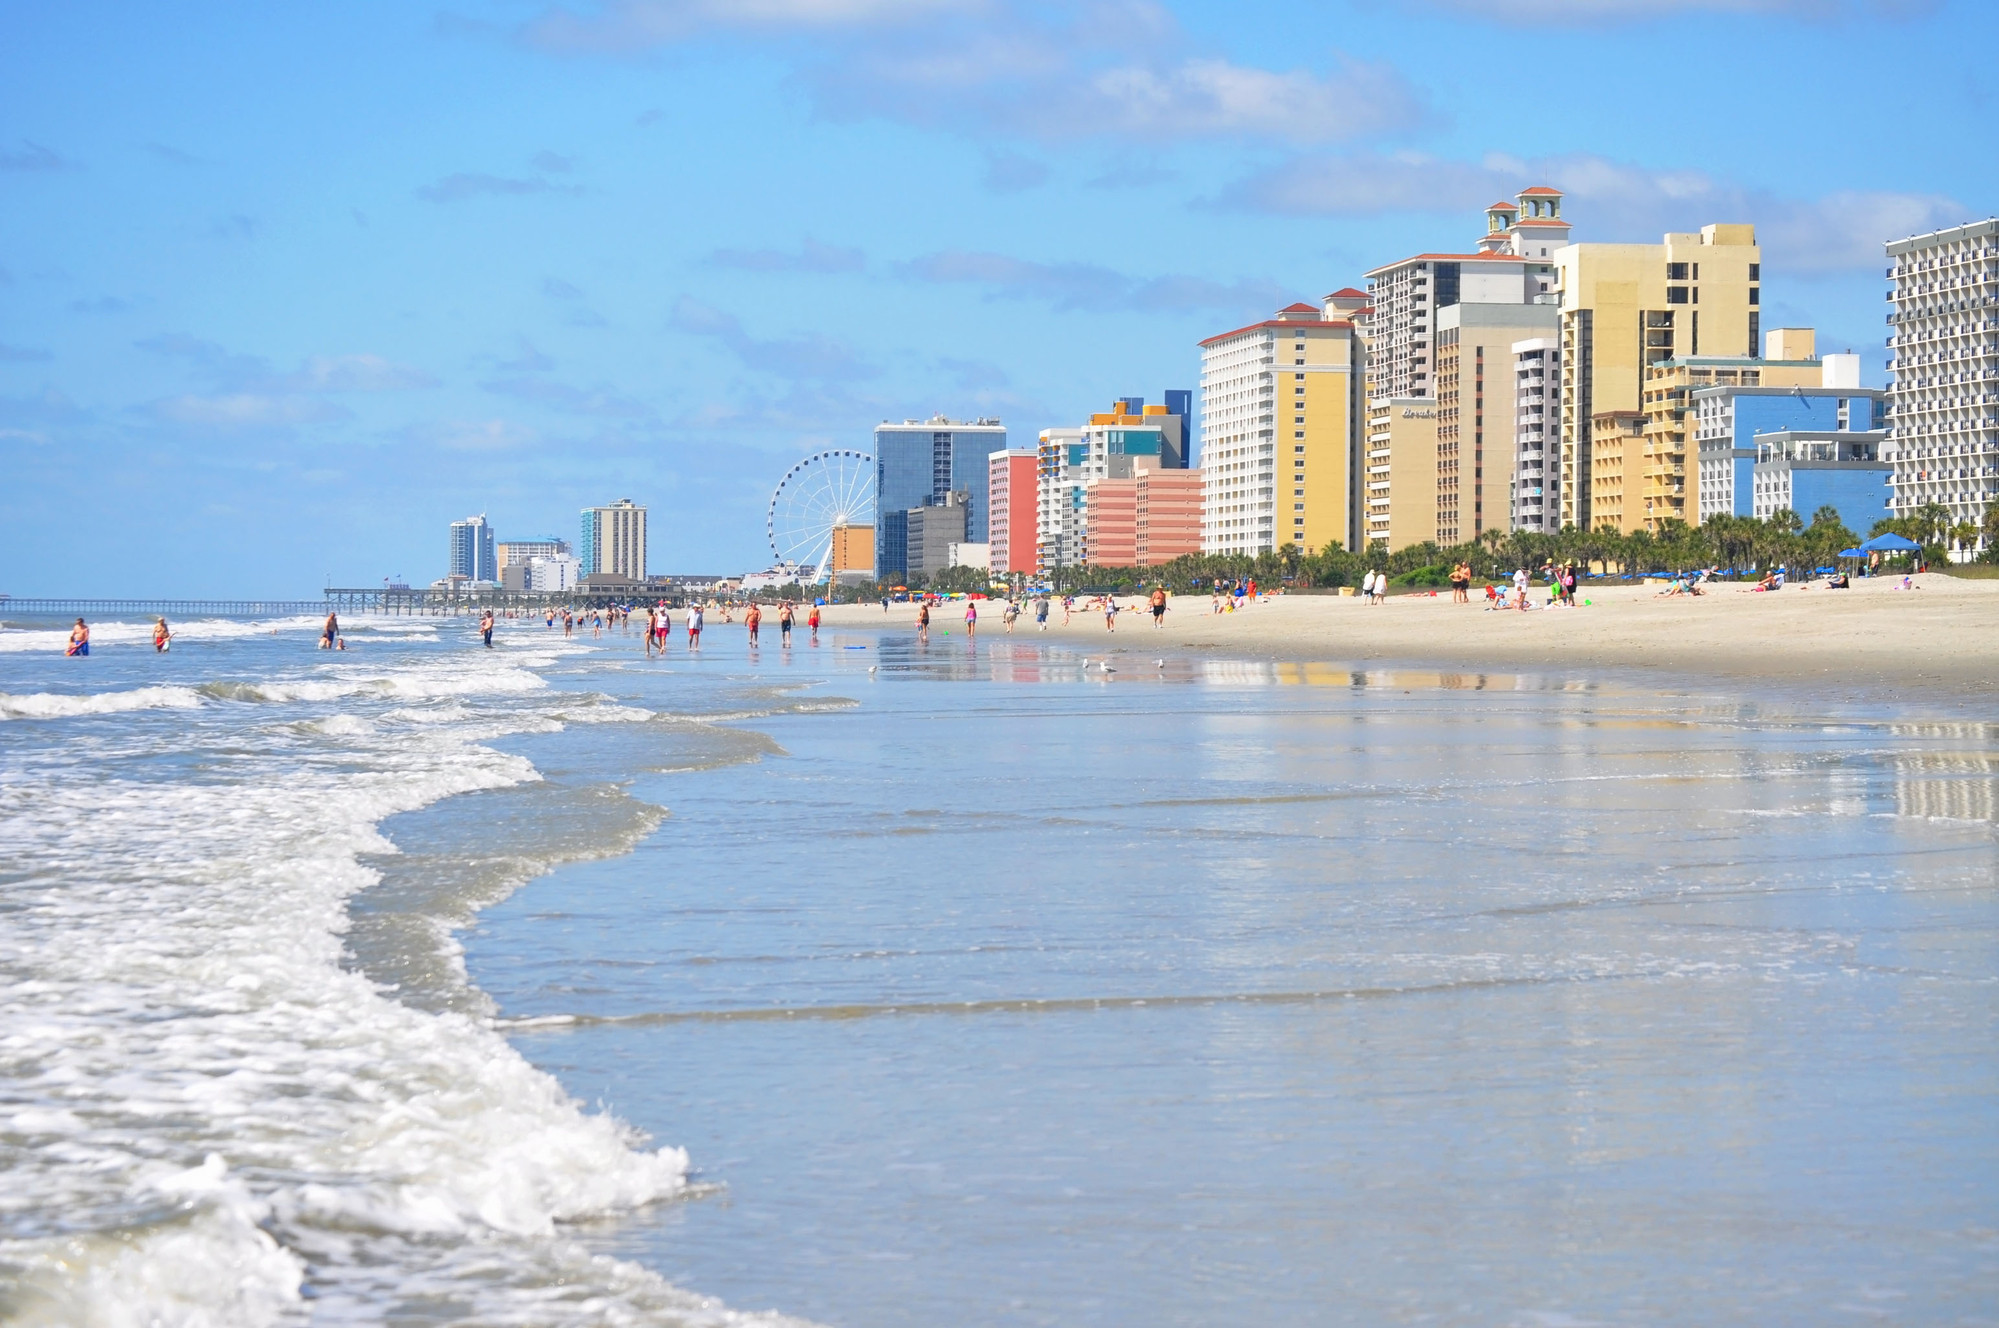 Bachelor Party Ideas Myrtle Beach
 Plan the Perfect Bachelorette Party in Myrtle Beach 2019